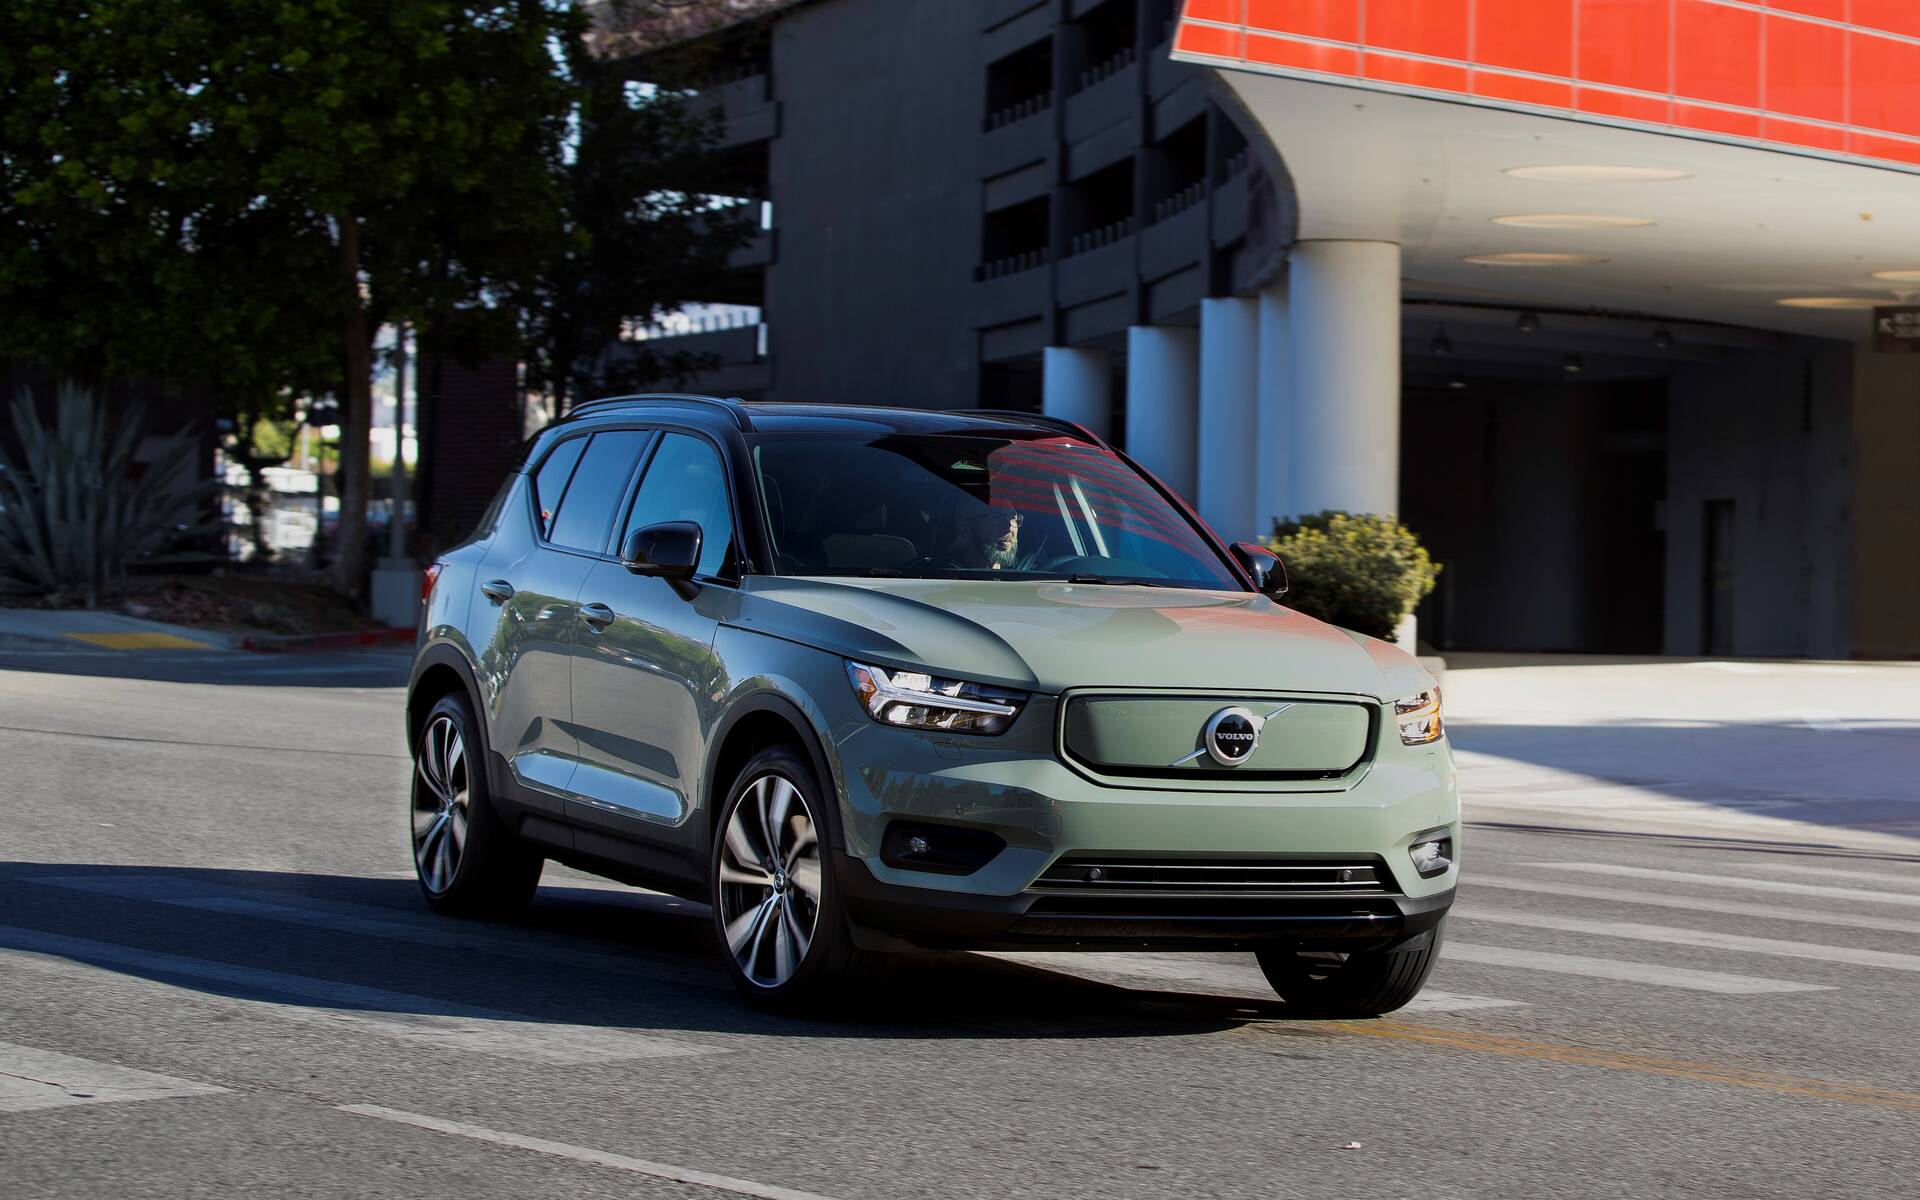 2022 Volvo XC40 Recharge Gets Price Cut, Extra Range - The Car Guide